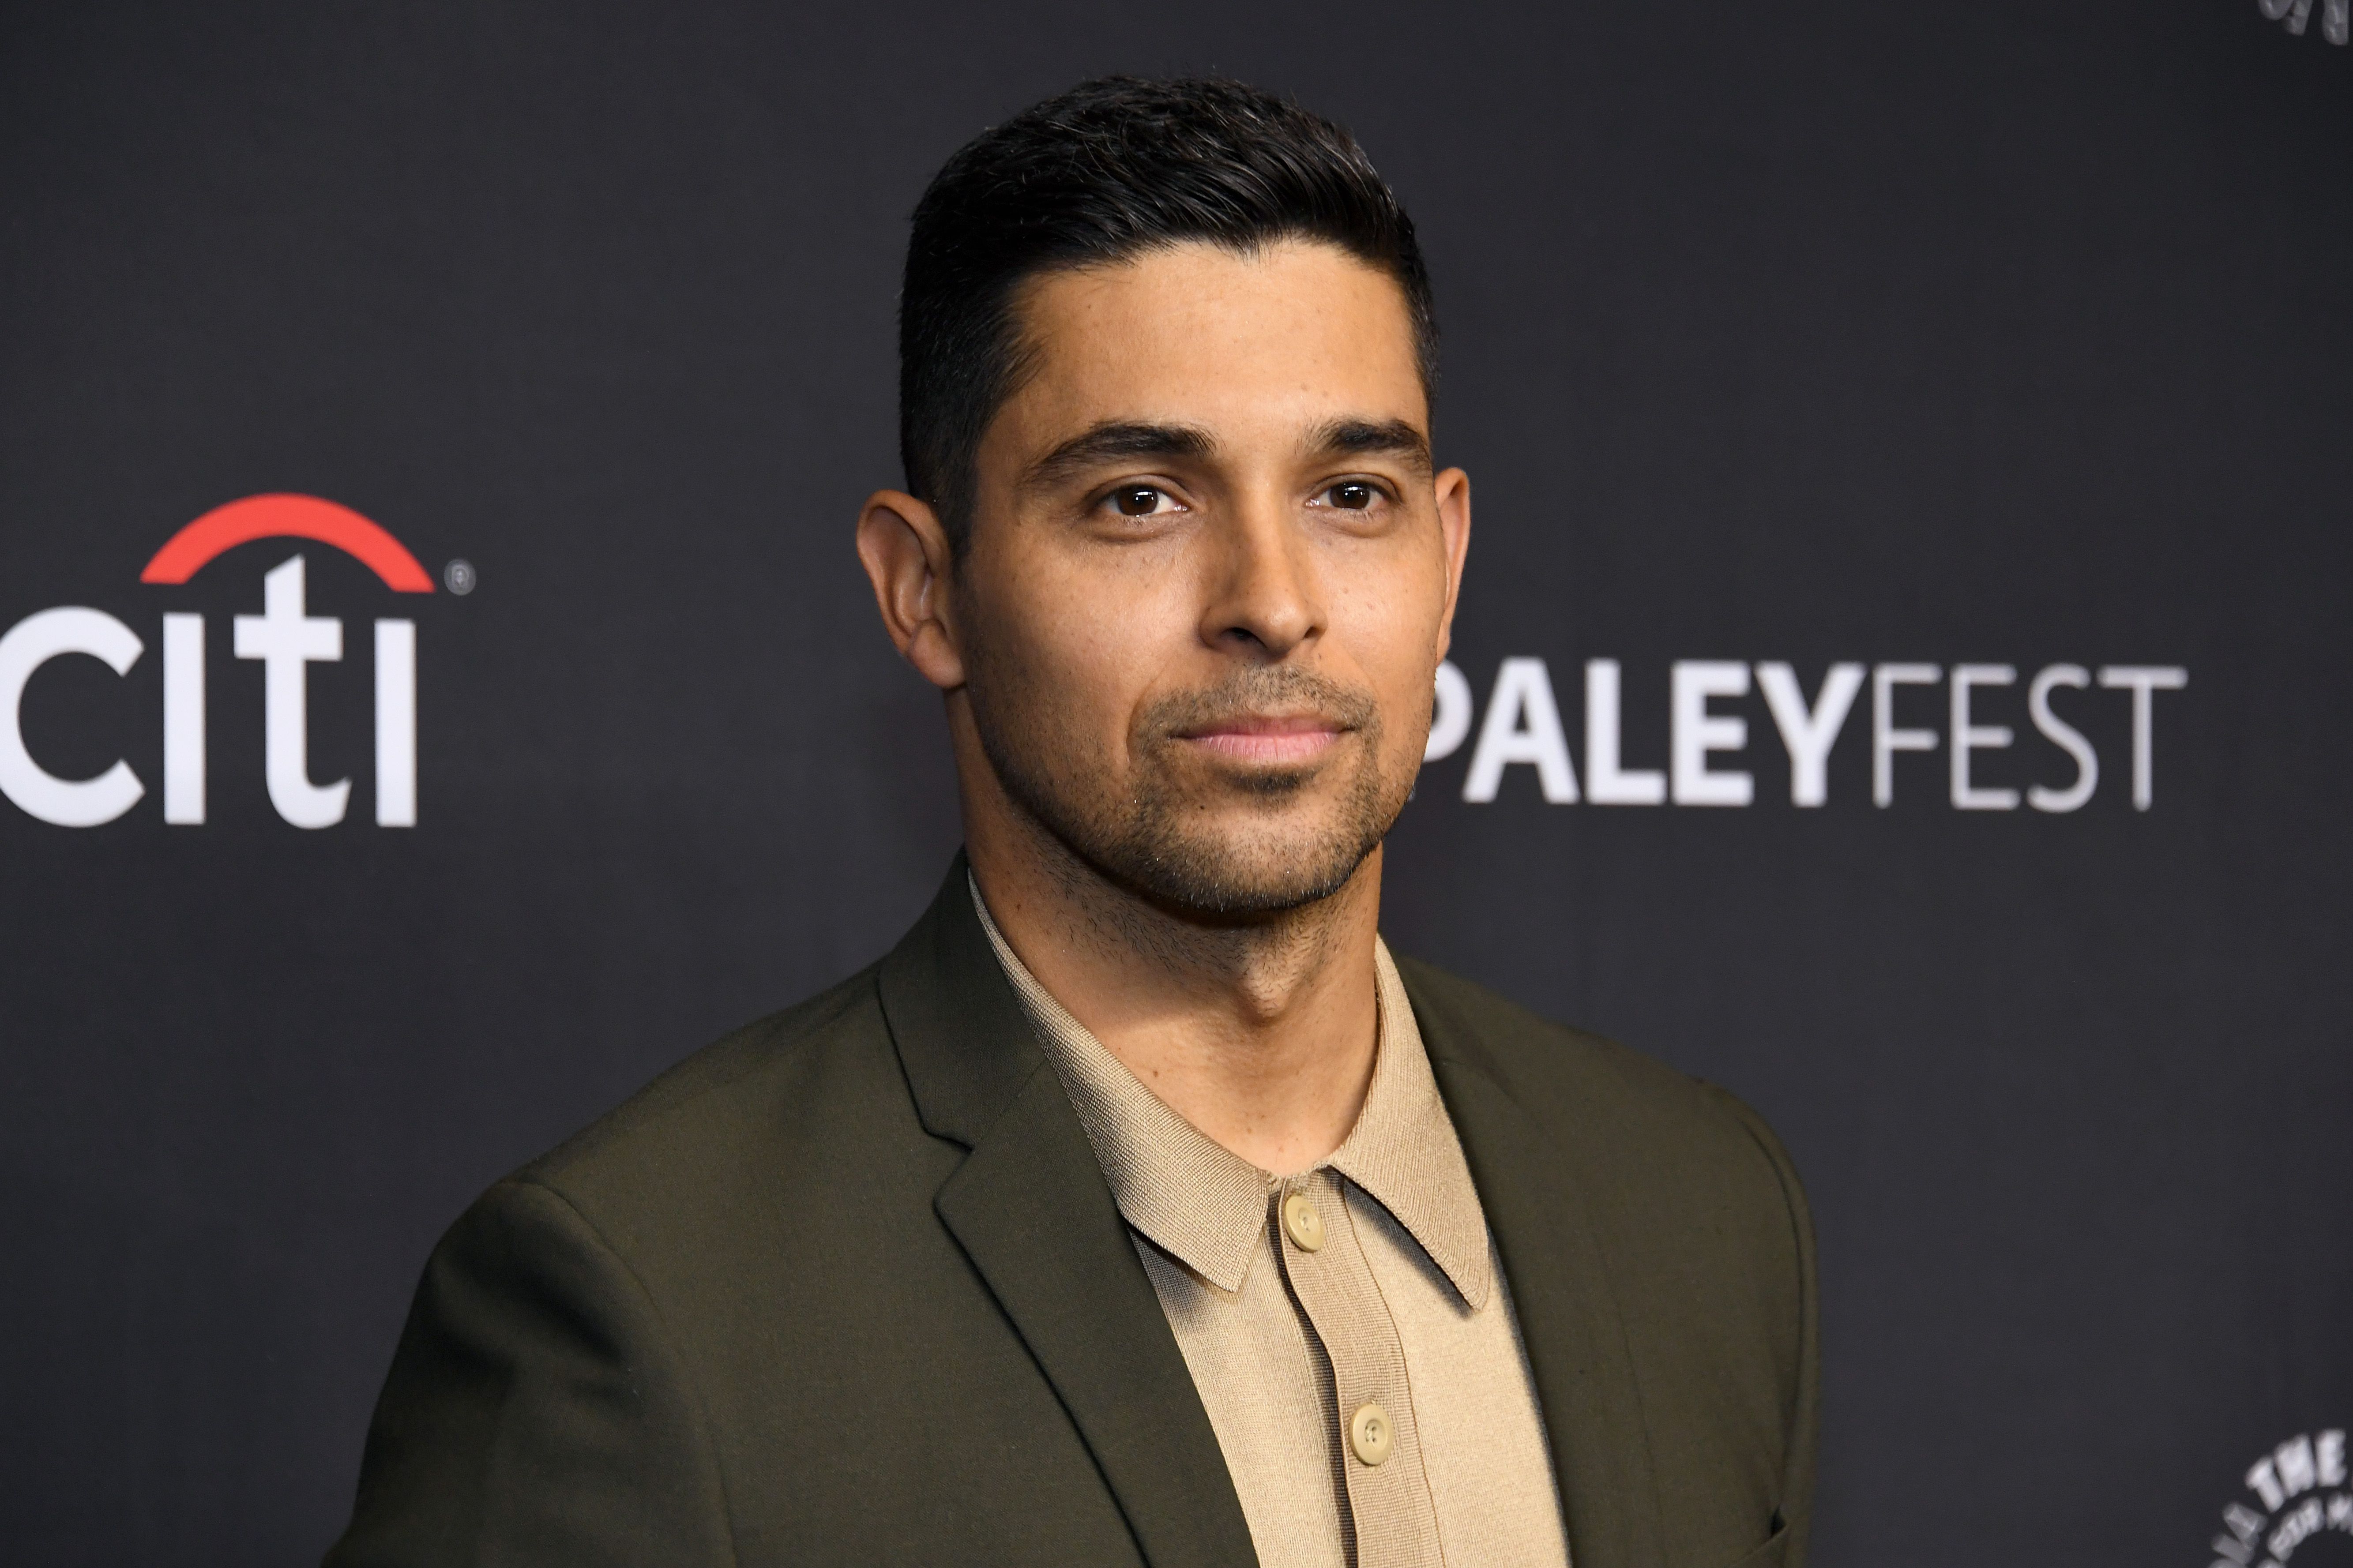 NCIS' Fans Support Wilmer Valderrama After Hearing His Heartbreaking  Personal News on Instagram